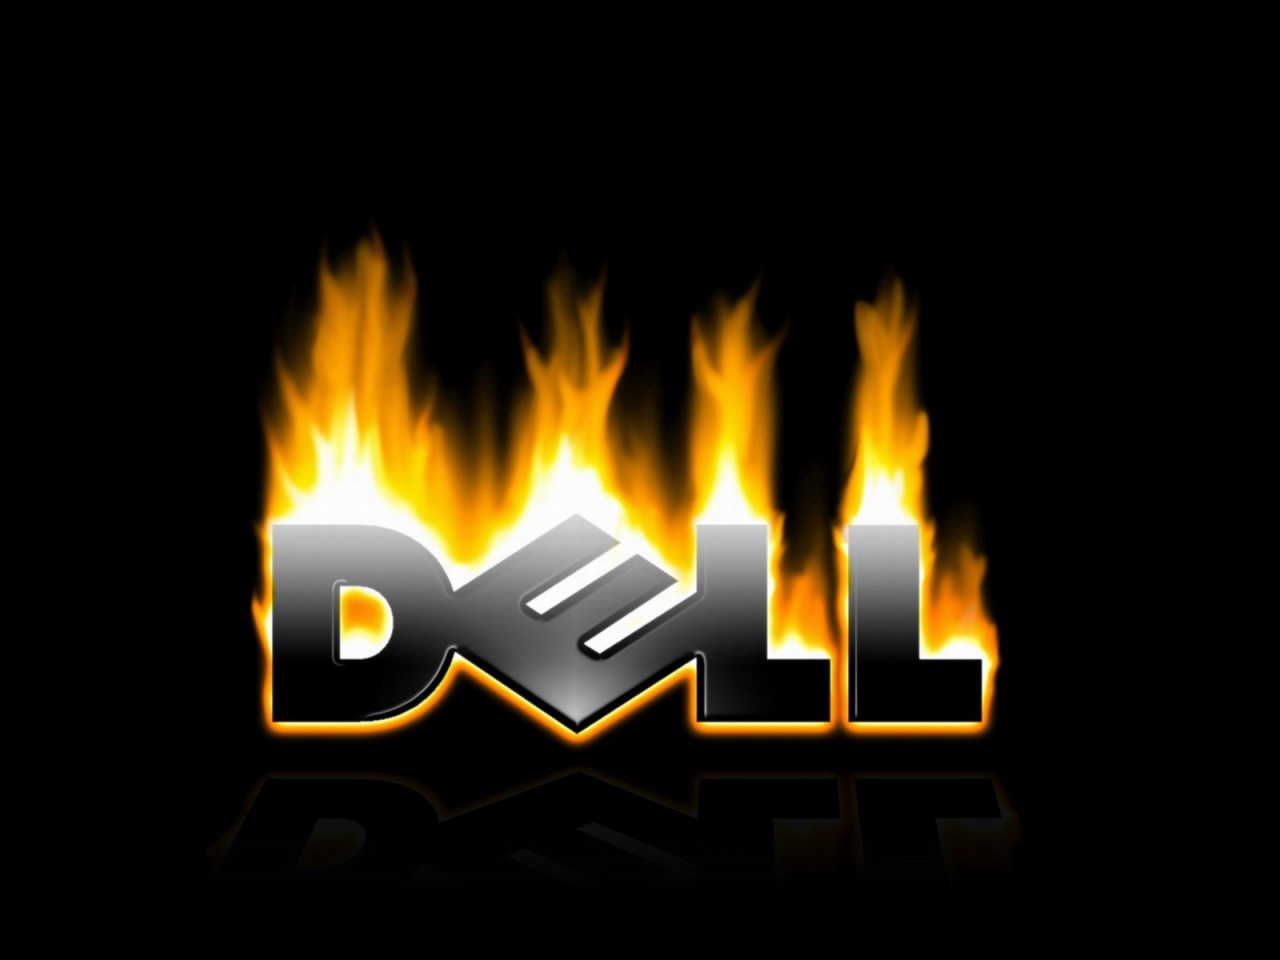 Dell in fire for 1280 x 960 resolution